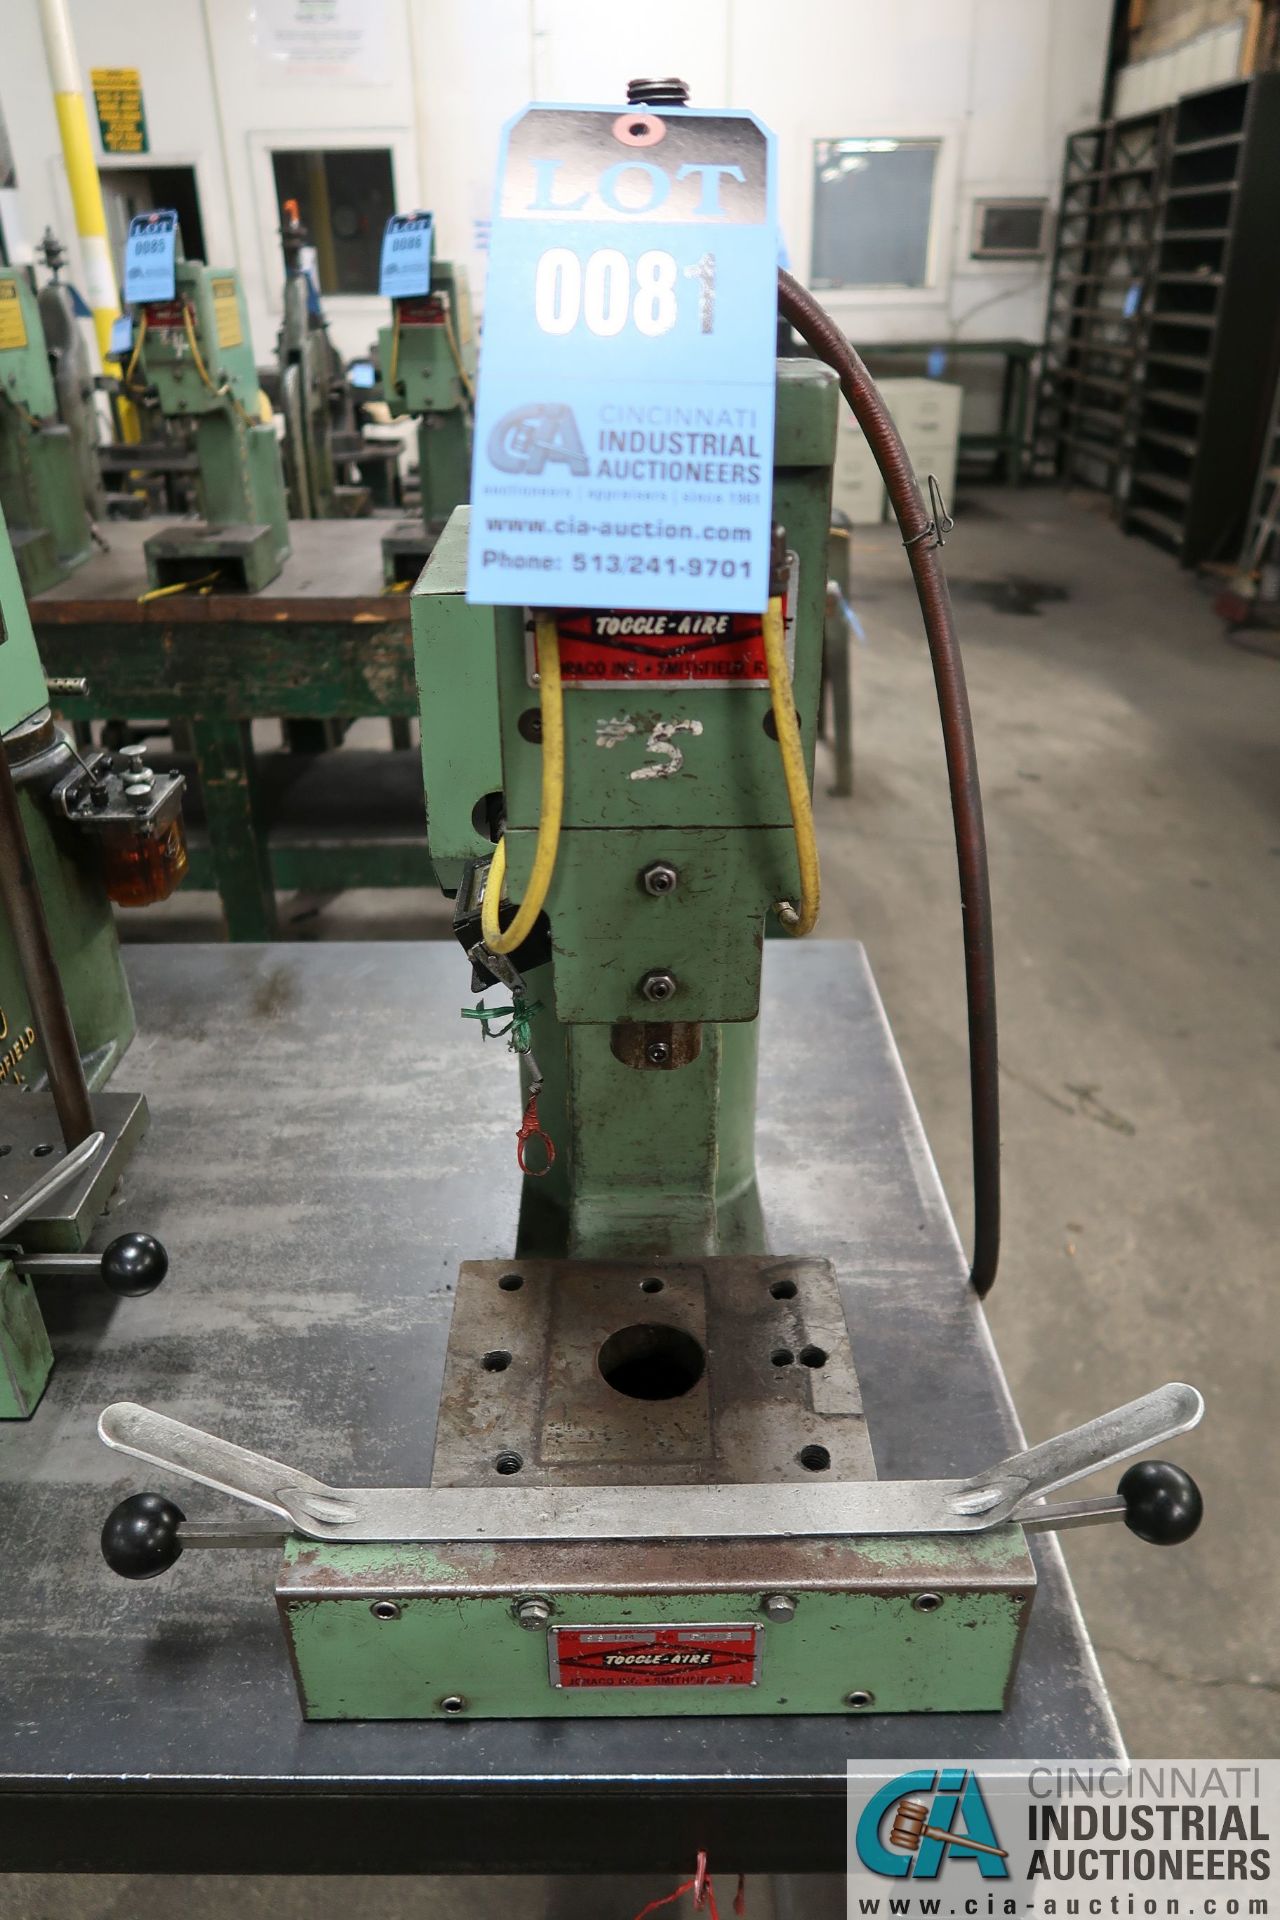 JORCO MODEL SSDM TOGGLE-AIR BENCH TOP PRESS; S/N 6483, DUAL LEVER CONTROLS - Image 2 of 3